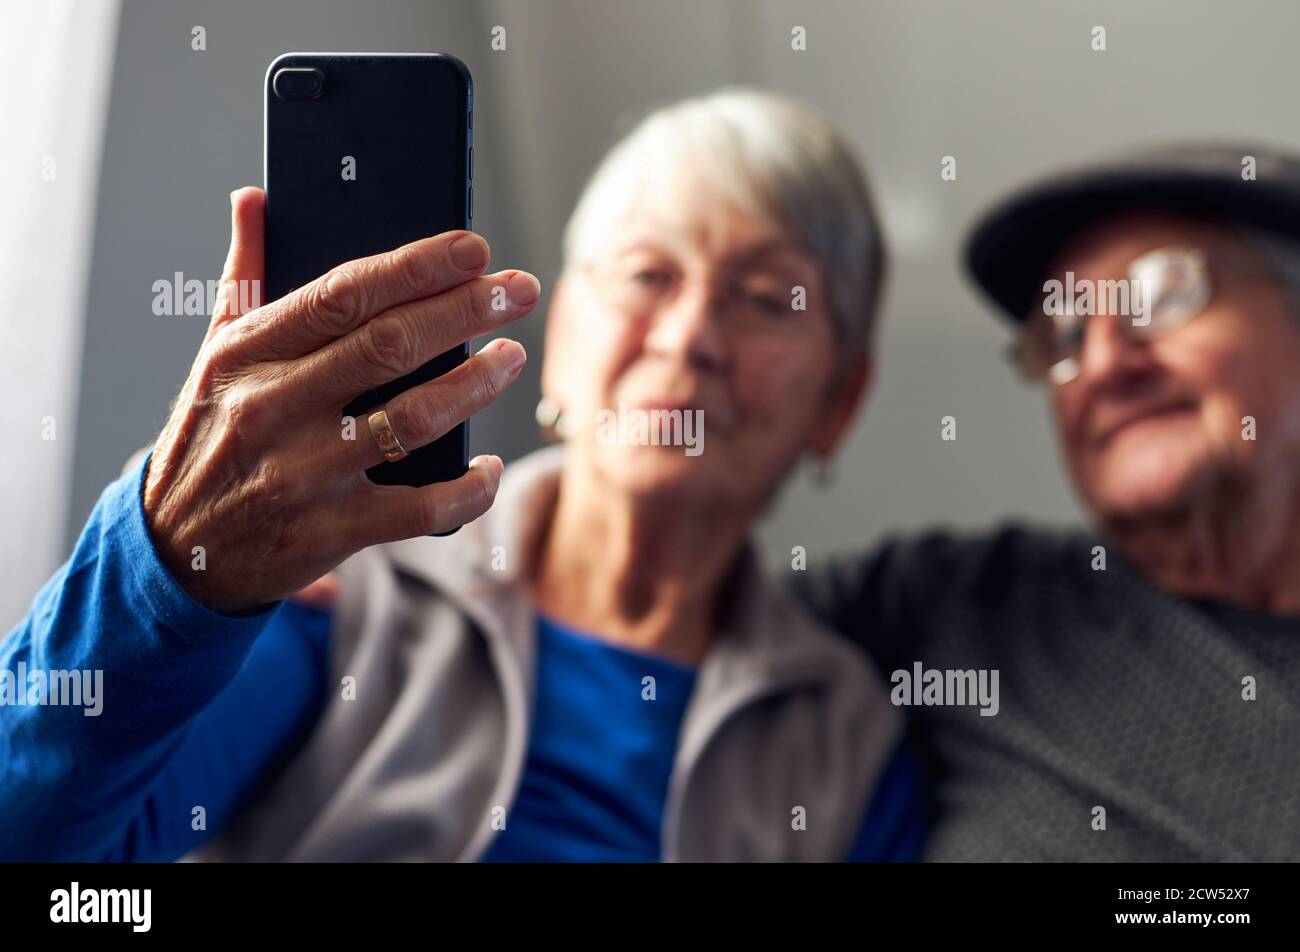 Senior Couple At Home Making Video Call To Family On Mobile Phone Stock Photo